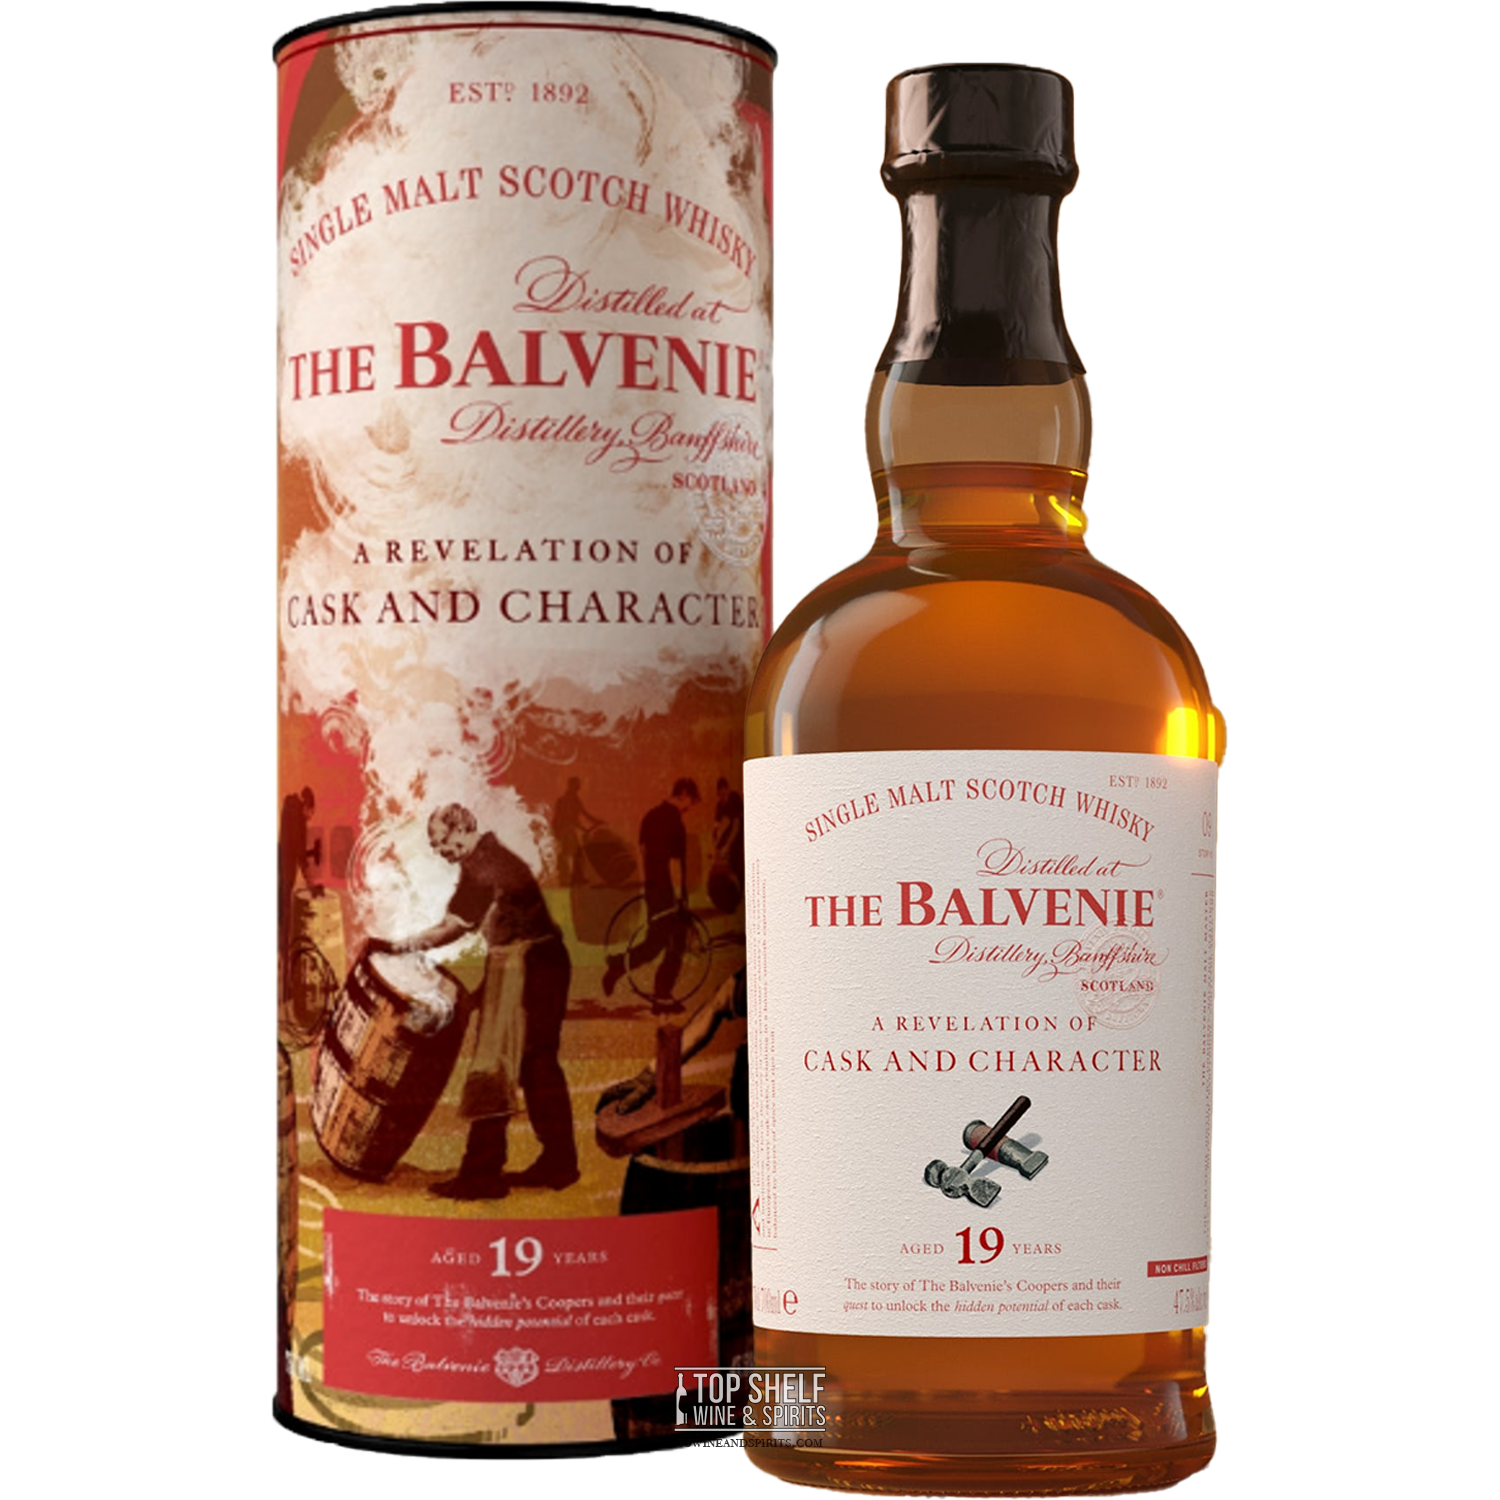 Balvenie 19 Year A Revelation of Cask and Character Scotch